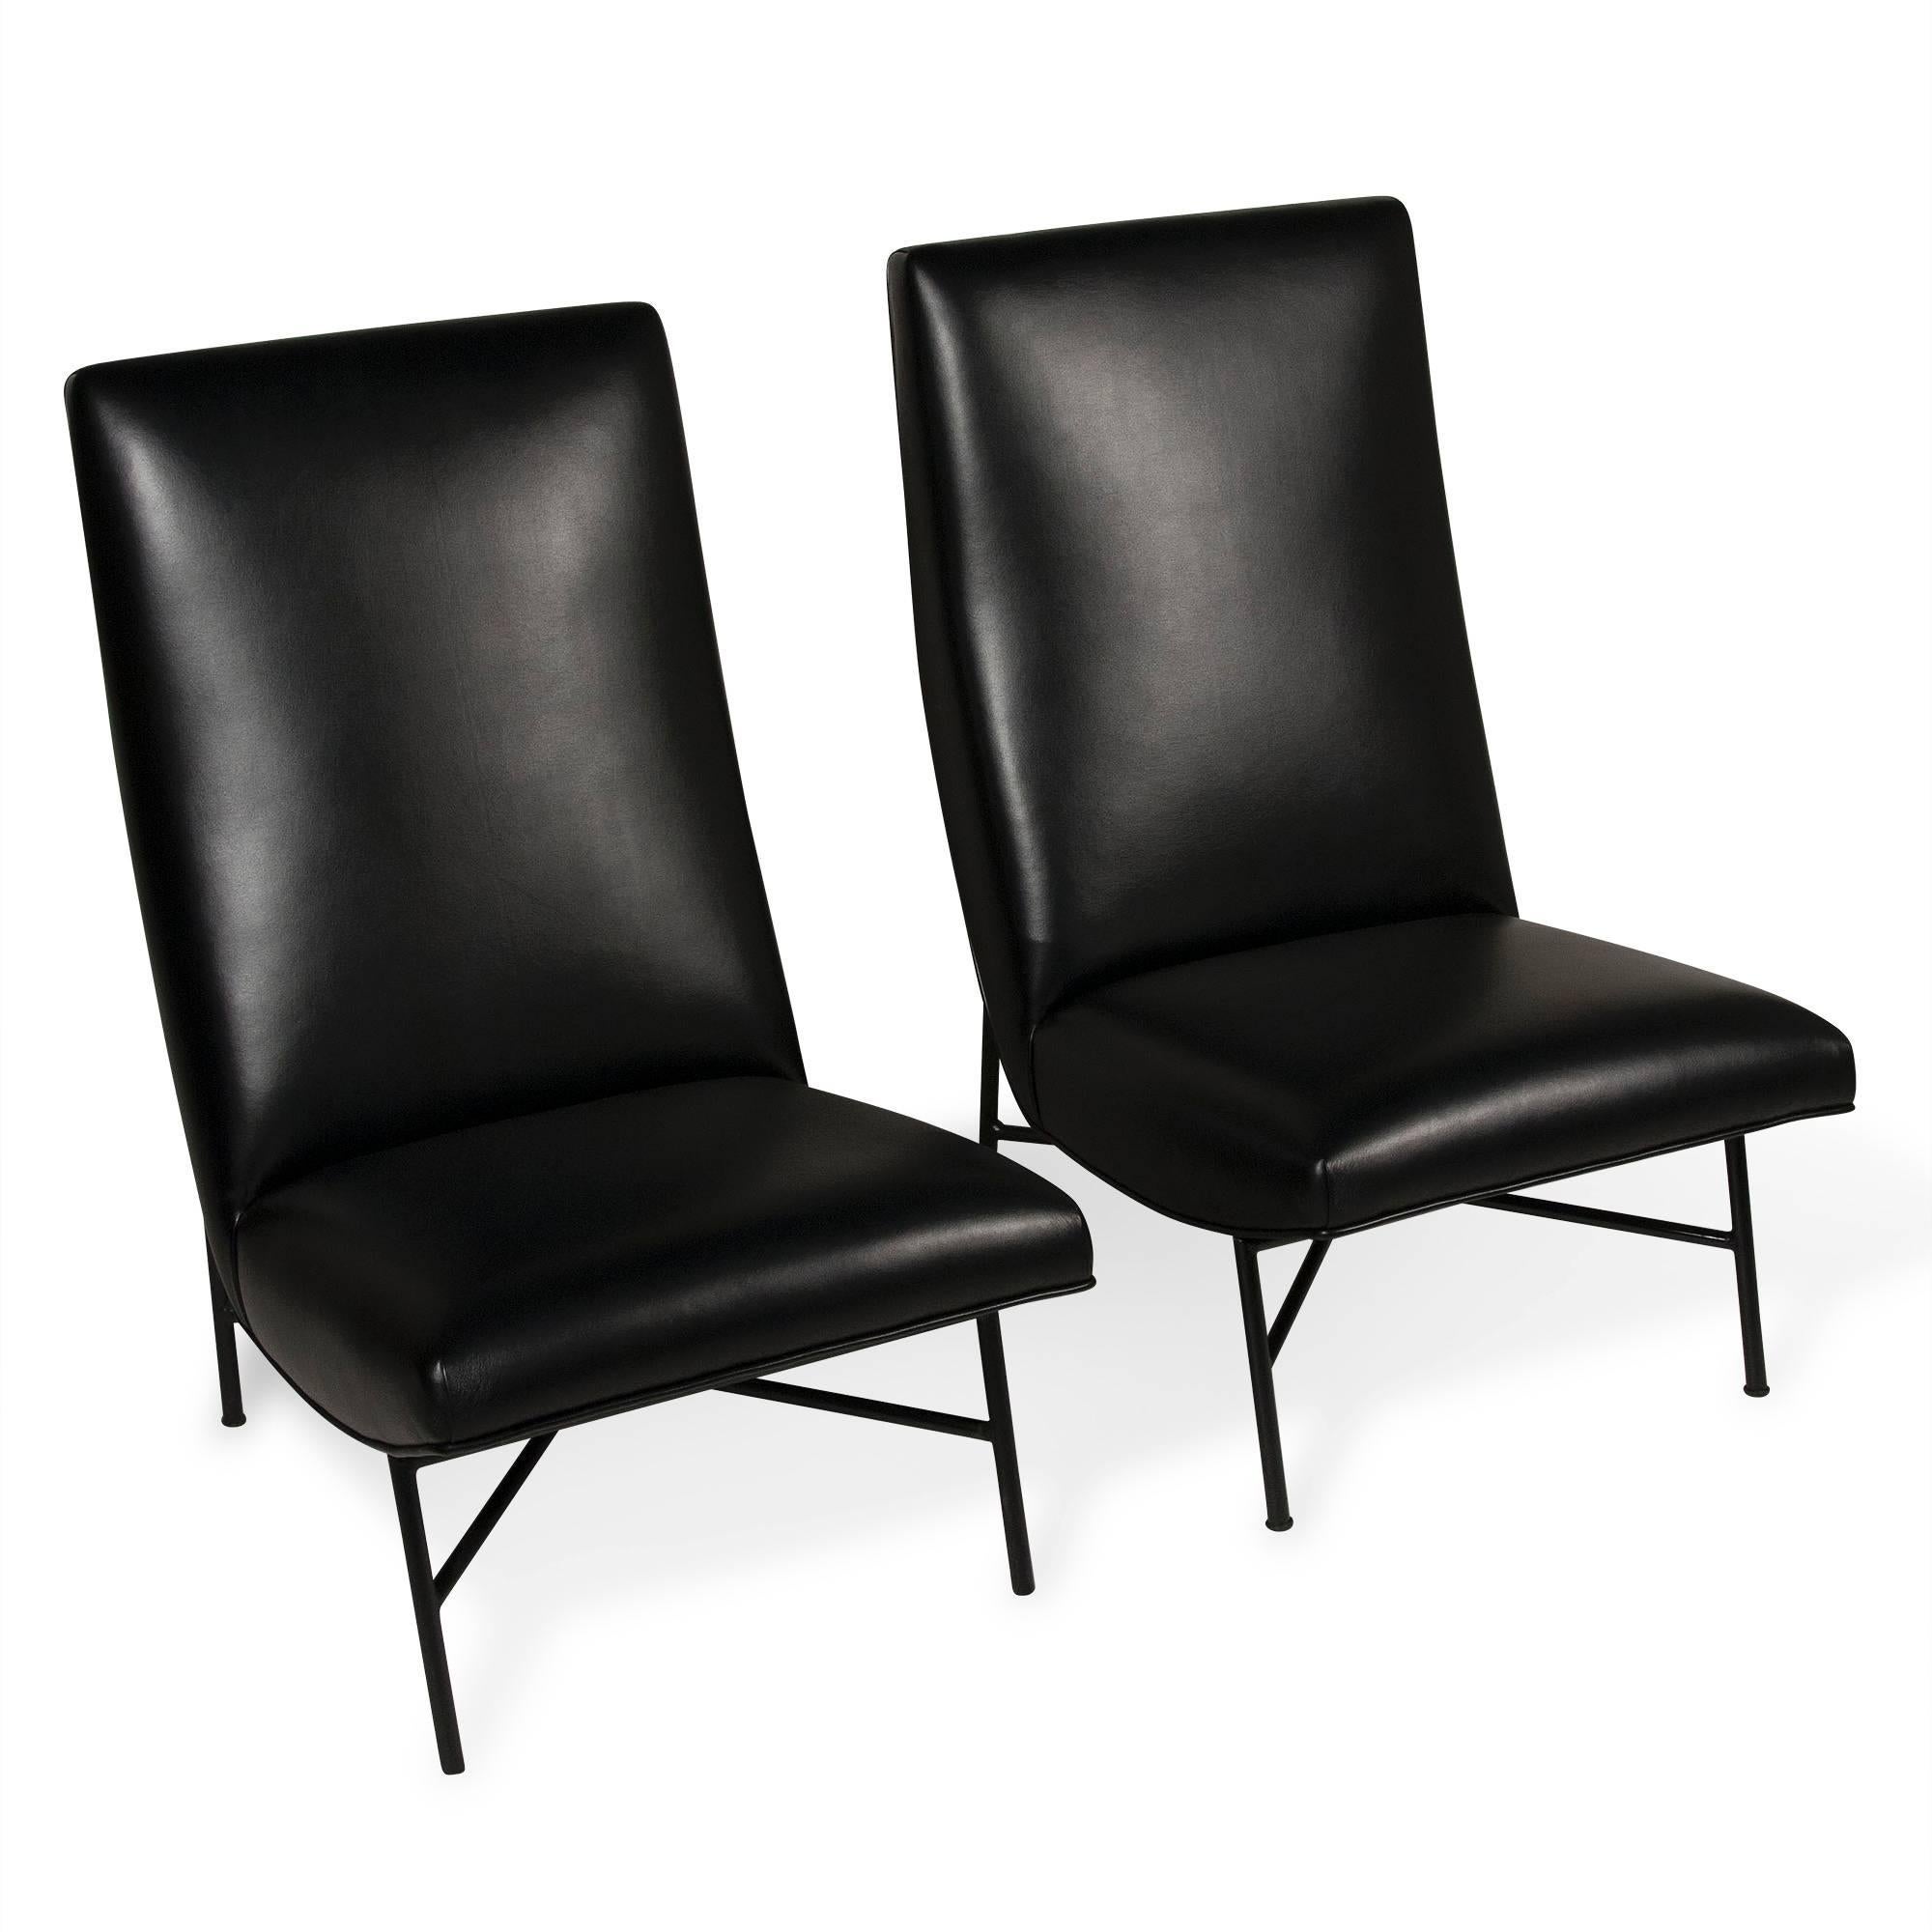 Pair of high back iron frame chairs, four legs with crossed stretcher support, by Dangles and Defrance for Burov Editions, French, circa 1955. Newly upholstered in high quality black vinyl. Back height 36 in, seat height in front 12 in, depth 19